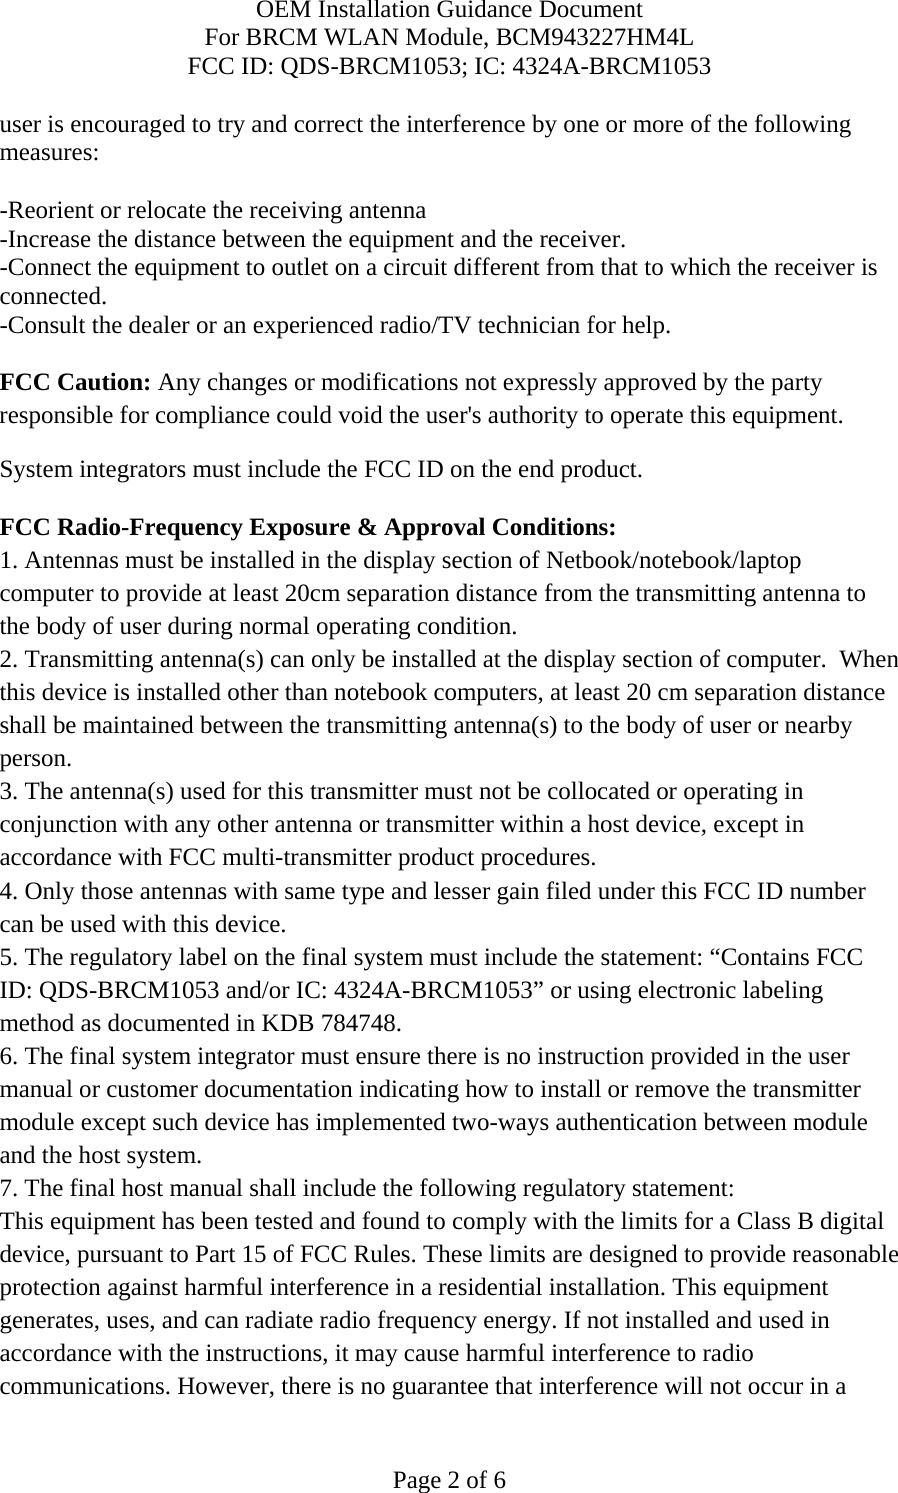 OEM Installation Guidance Document For BRCM WLAN Module, BCM943227HM4L FCC ID: QDS-BRCM1053; IC: 4324A-BRCM1053  Page 2 of 6 user is encouraged to try and correct the interference by one or more of the following measures:   -Reorient or relocate the receiving antenna -Increase the distance between the equipment and the receiver. -Connect the equipment to outlet on a circuit different from that to which the receiver is connected. -Consult the dealer or an experienced radio/TV technician for help.  FCC Caution: Any changes or modifications not expressly approved by the party responsible for compliance could void the user&apos;s authority to operate this equipment. System integrators must include the FCC ID on the end product.   FCC Radio-Frequency Exposure &amp; Approval Conditions: 1. Antennas must be installed in the display section of Netbook/notebook/laptop computer to provide at least 20cm separation distance from the transmitting antenna to the body of user during normal operating condition. 2. Transmitting antenna(s) can only be installed at the display section of computer.  When this device is installed other than notebook computers, at least 20 cm separation distance shall be maintained between the transmitting antenna(s) to the body of user or nearby person. 3. The antenna(s) used for this transmitter must not be collocated or operating in conjunction with any other antenna or transmitter within a host device, except in accordance with FCC multi-transmitter product procedures. 4. Only those antennas with same type and lesser gain filed under this FCC ID number can be used with this device. 5. The regulatory label on the final system must include the statement: “Contains FCC ID: QDS-BRCM1053 and/or IC: 4324A-BRCM1053” or using electronic labeling method as documented in KDB 784748. 6. The final system integrator must ensure there is no instruction provided in the user manual or customer documentation indicating how to install or remove the transmitter module except such device has implemented two-ways authentication between module and the host system. 7. The final host manual shall include the following regulatory statement: This equipment has been tested and found to comply with the limits for a Class B digital device, pursuant to Part 15 of FCC Rules. These limits are designed to provide reasonable protection against harmful interference in a residential installation. This equipment generates, uses, and can radiate radio frequency energy. If not installed and used in accordance with the instructions, it may cause harmful interference to radio communications. However, there is no guarantee that interference will not occur in a 